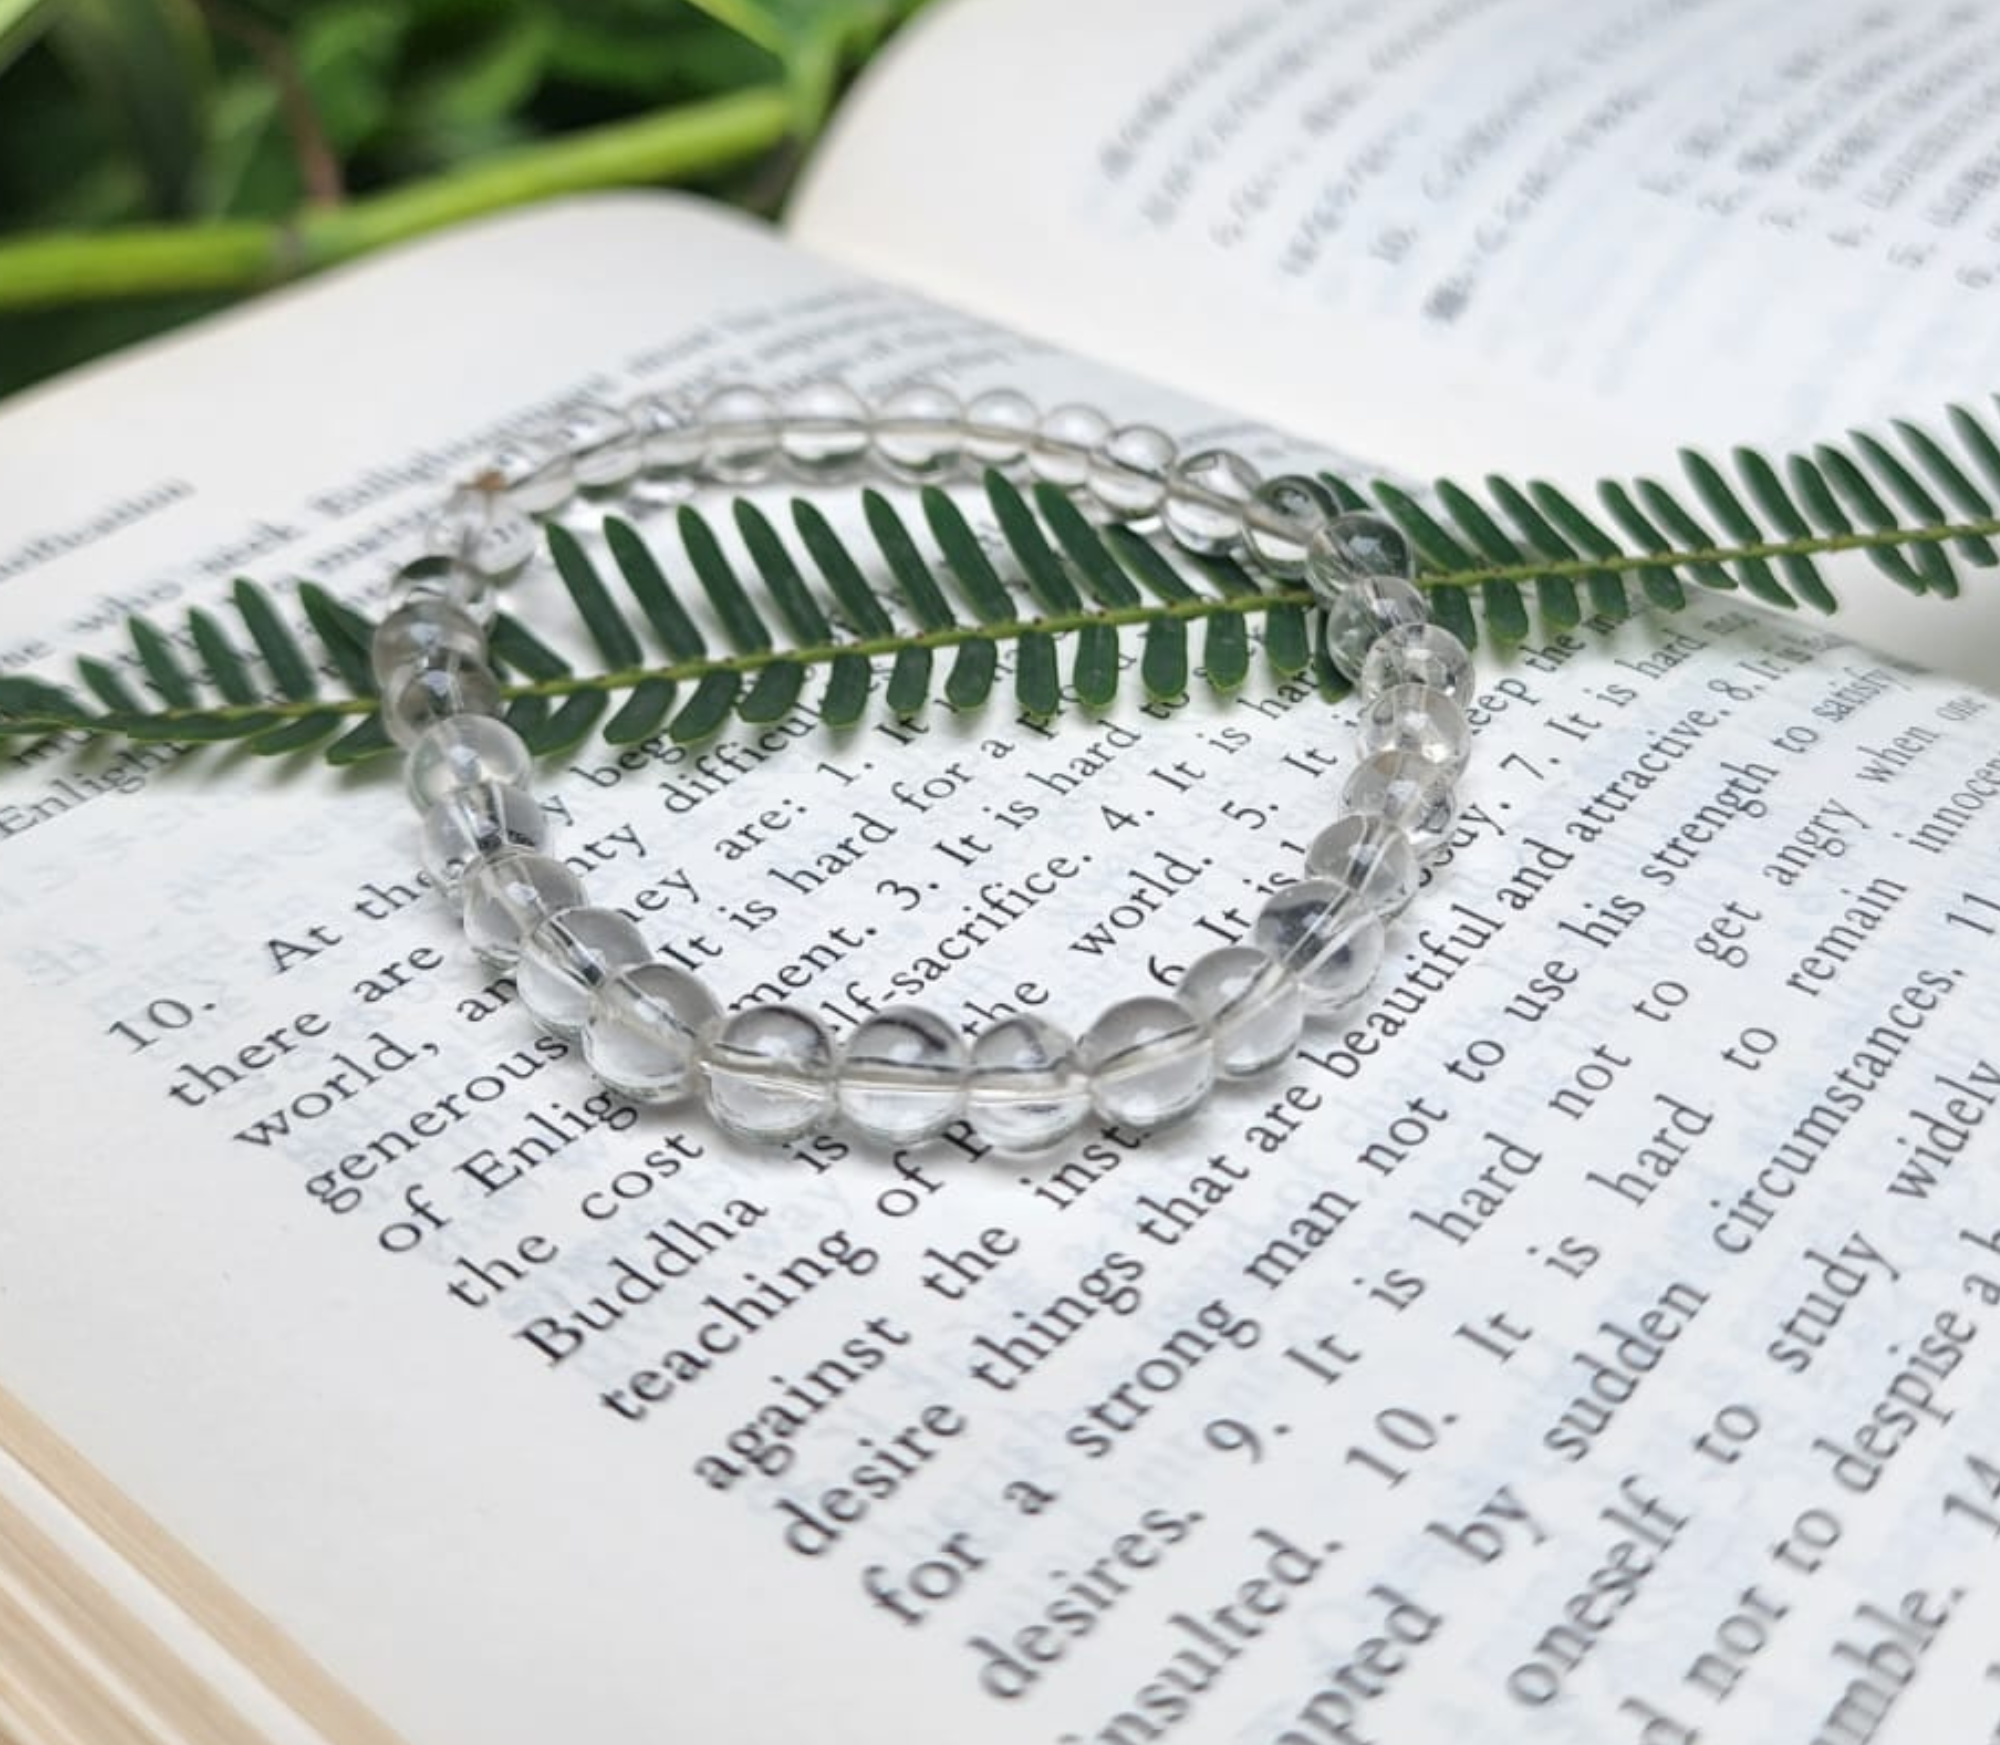 Clear Quartz Bracelet for clearer, brighter thoughts - The Rock Crystal Shop